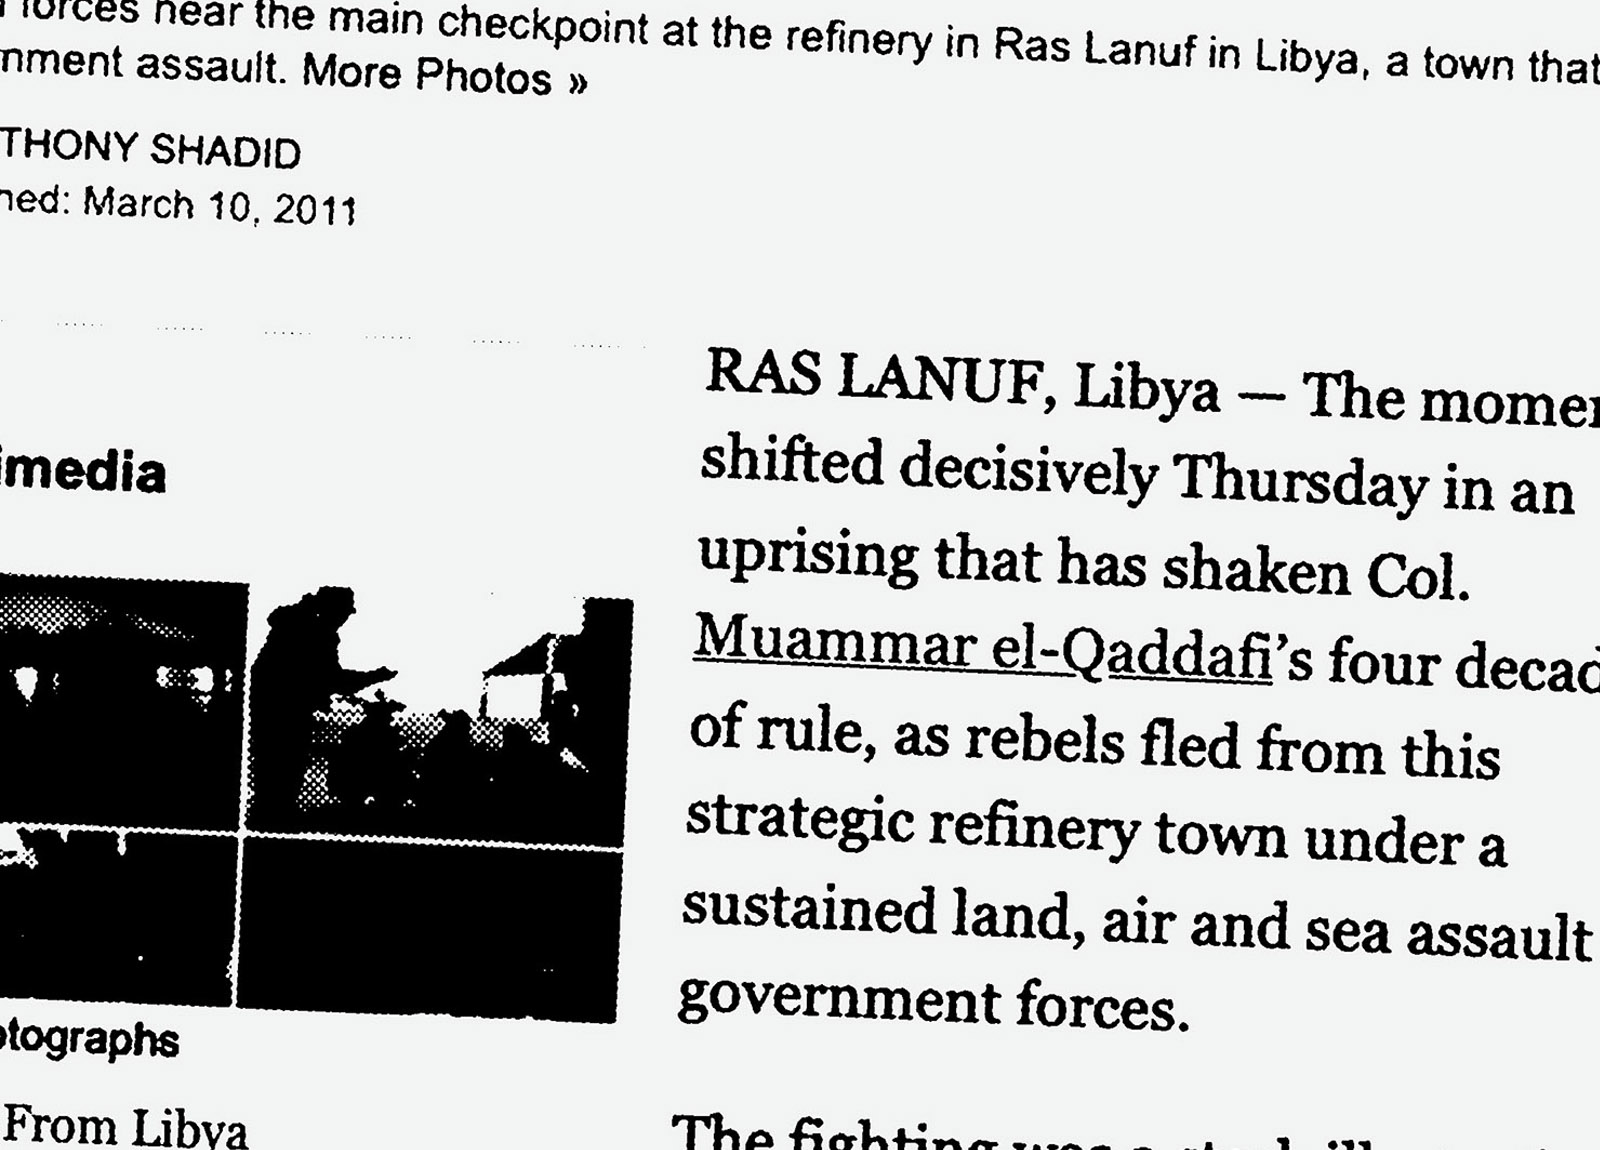 Illustration:
A New York Times article from 2011, taken from its website, is blown up so that it extends beyond the edges of the frame. The first sentences of the article read: “The moment shifted decisively Thursday in an uprising that has shaken Col. Muammar el-Qaddafi’s four decades of rule, as rebels fled from this strategic refinery town under a sustained land, air and sea assault on government forces.”